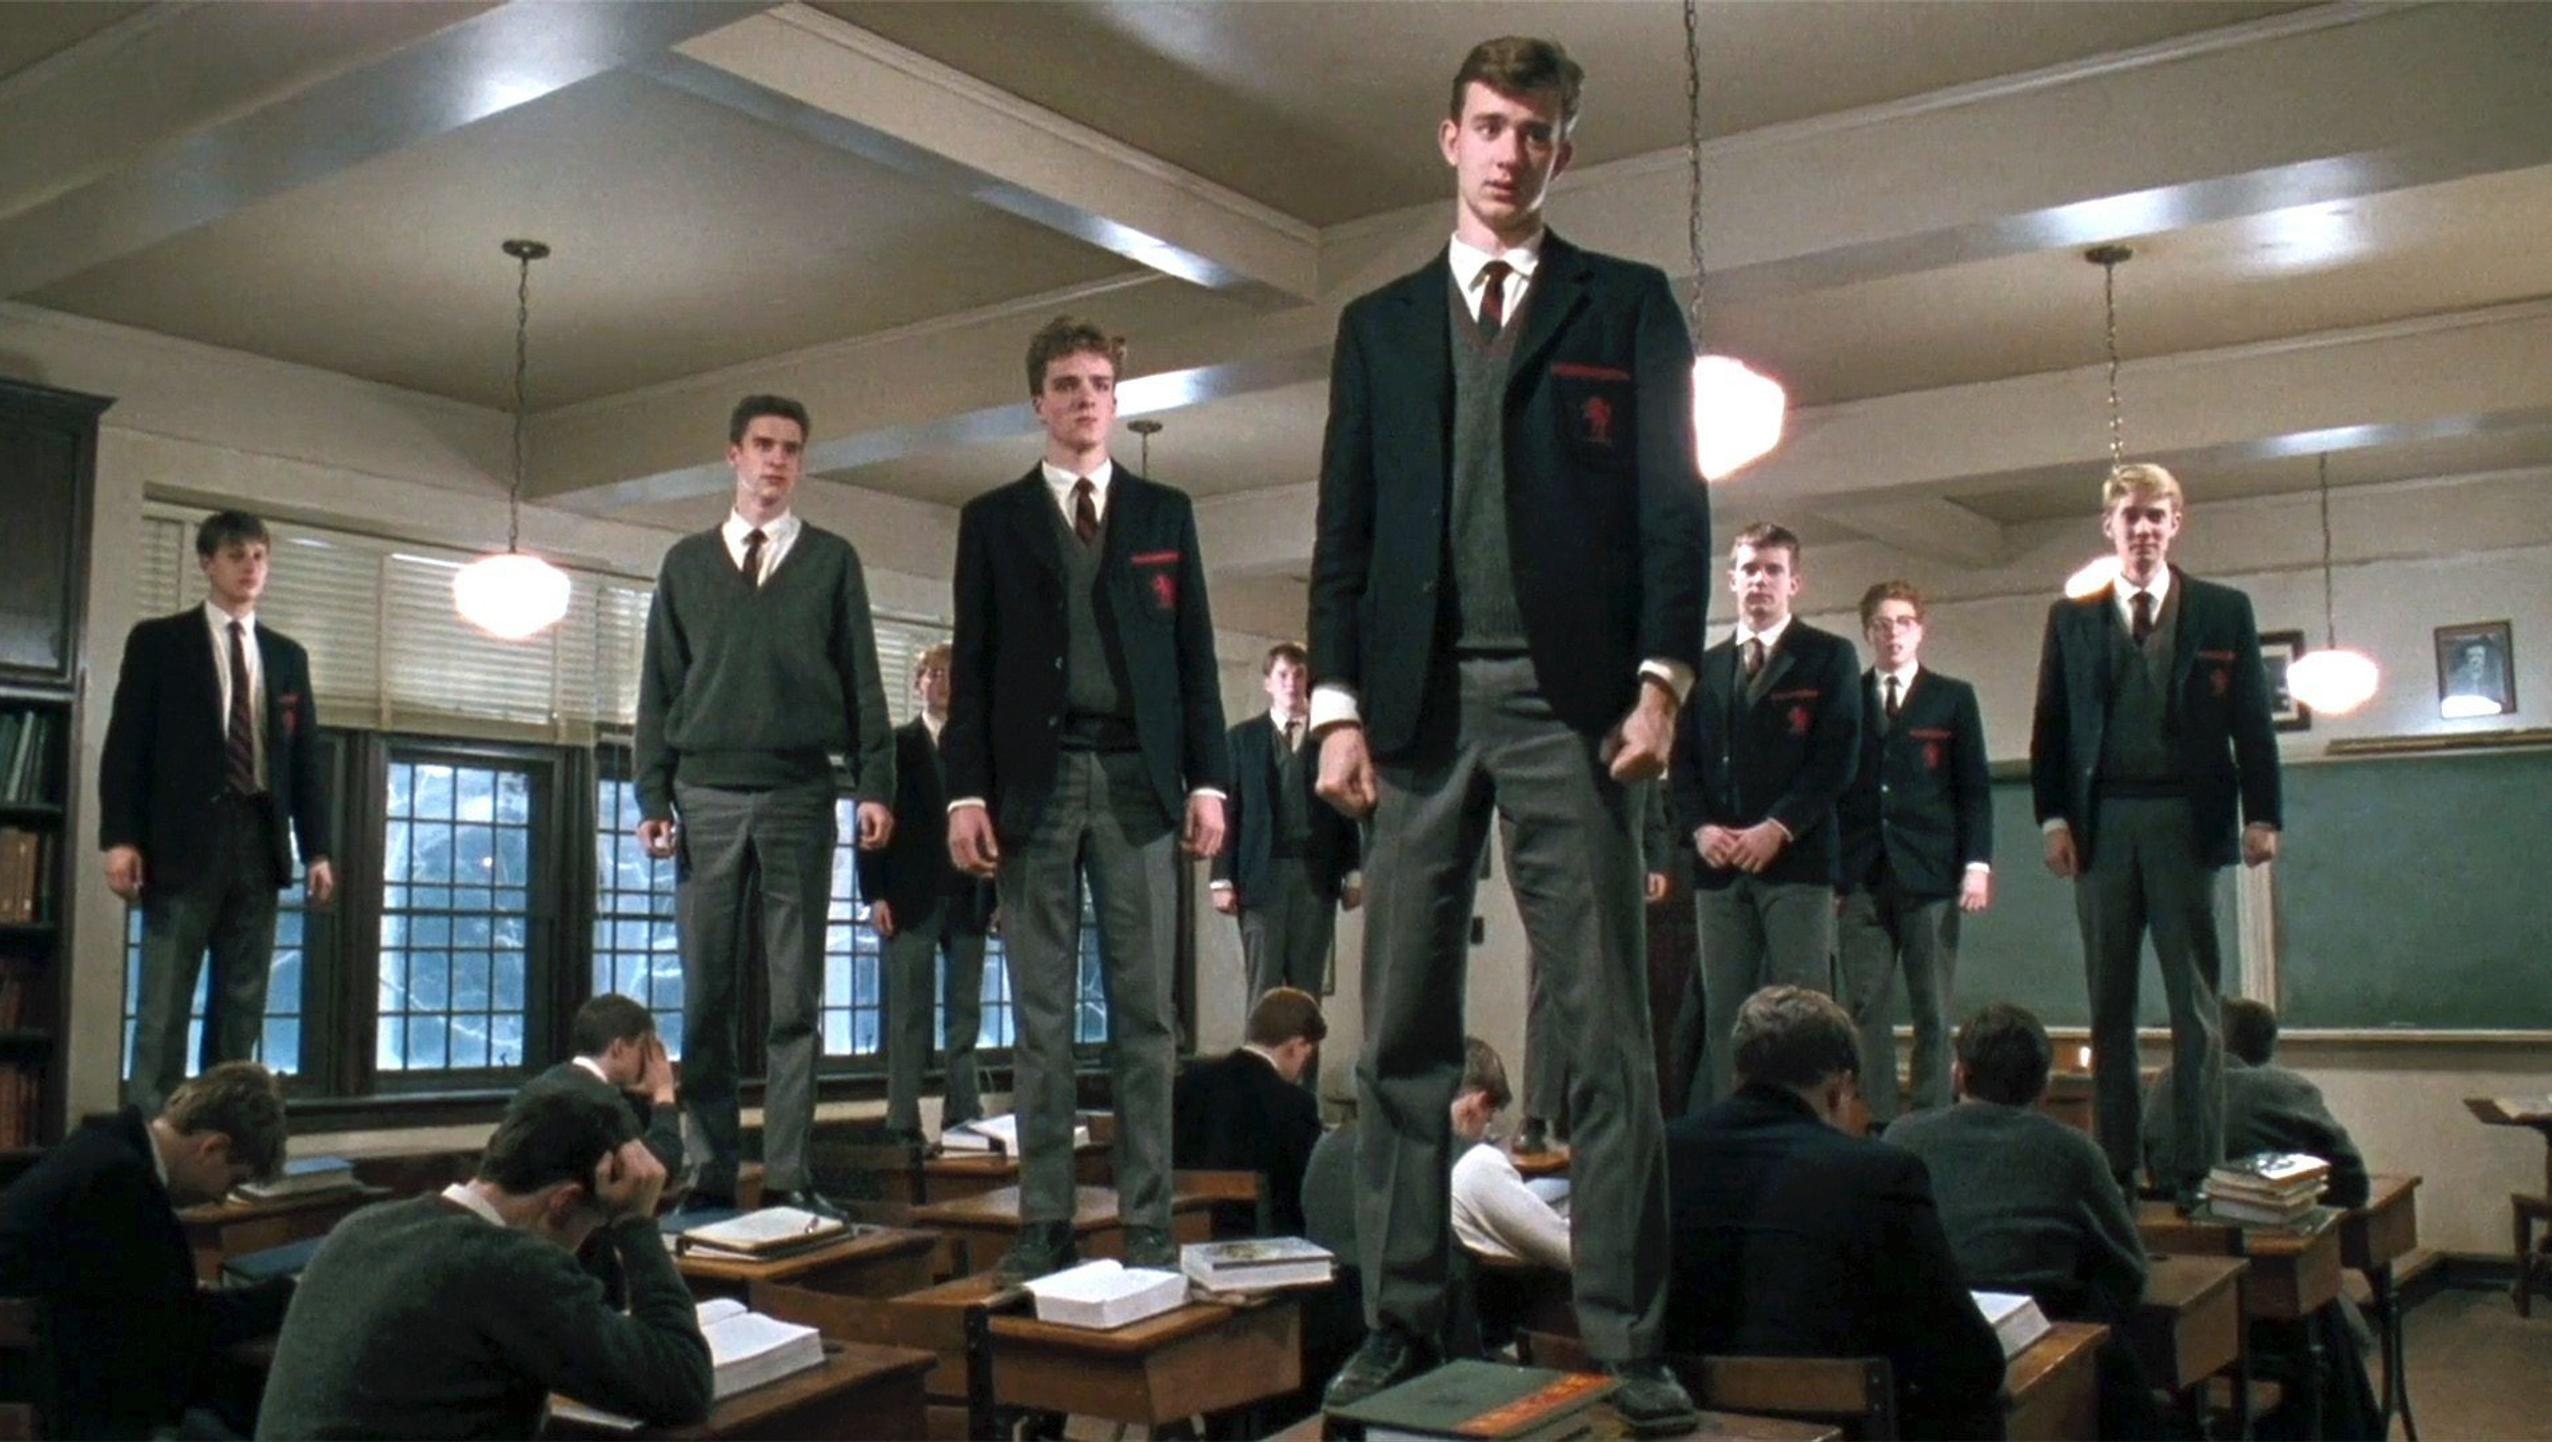 Dead Poets Society: The film received the Cesar Award for Best Foreign Film. 2560x1450 HD Wallpaper.